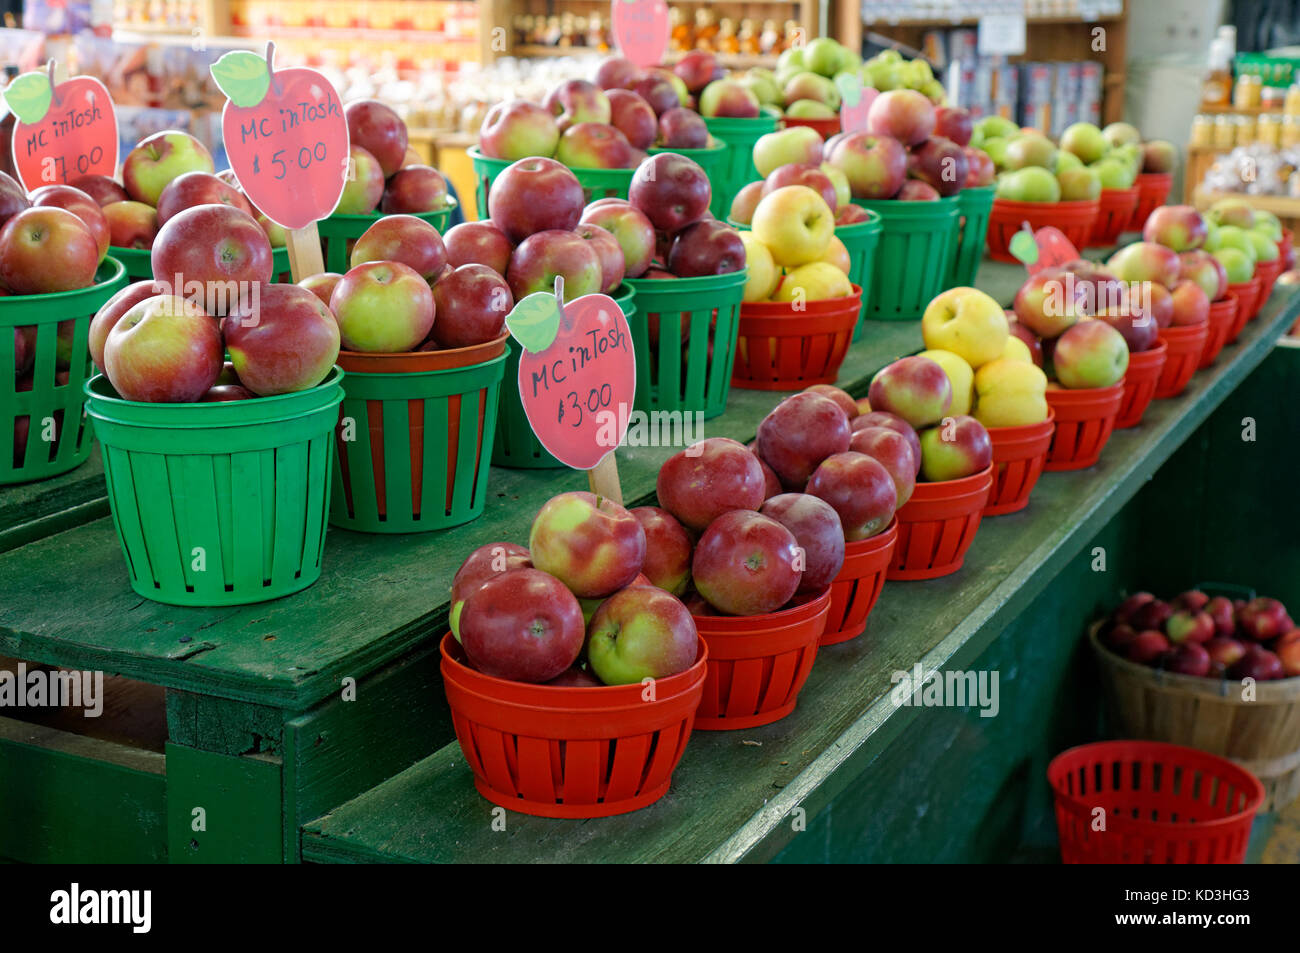 Baskets of fresh Quebec grown McIntosh apples for sale in the Jean Talon public market or Marche Jean Talon, Montreal, Quebec, Canada Stock Photo